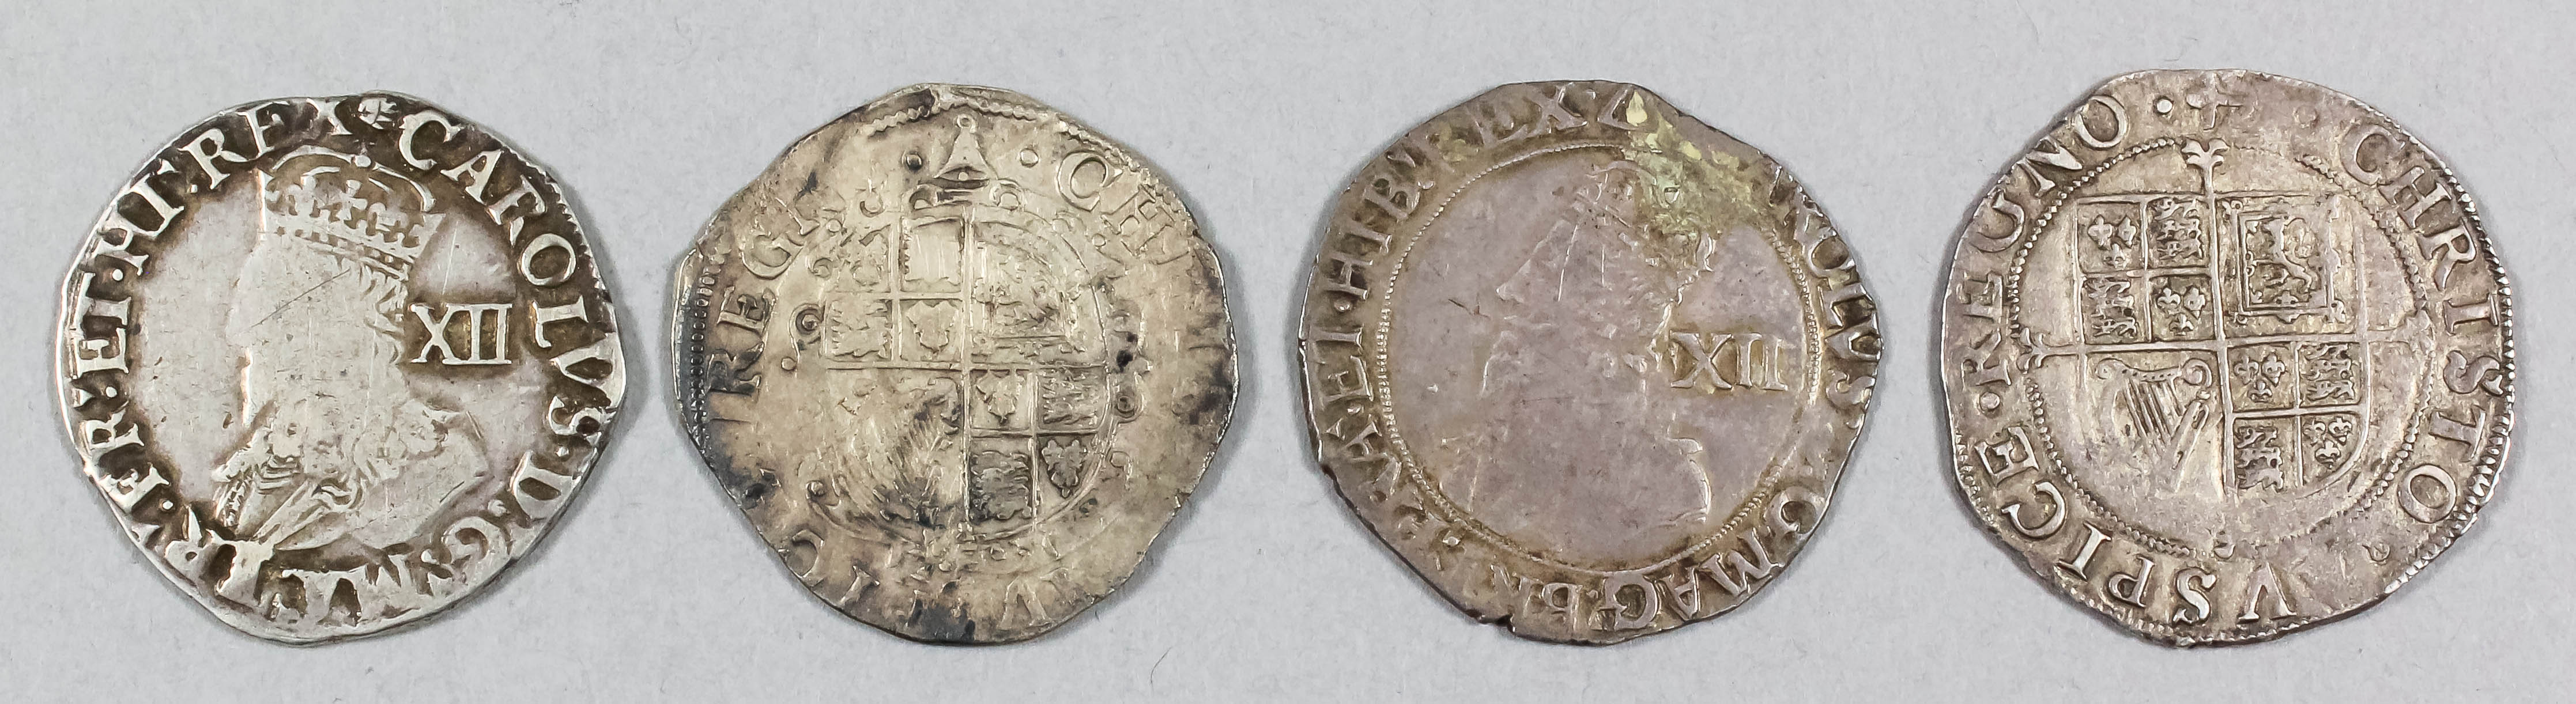 Four Charles I (1625-1649) shillings, mint marks Bell (1634-1635), Tun (1636-1638), Anchor (1636-